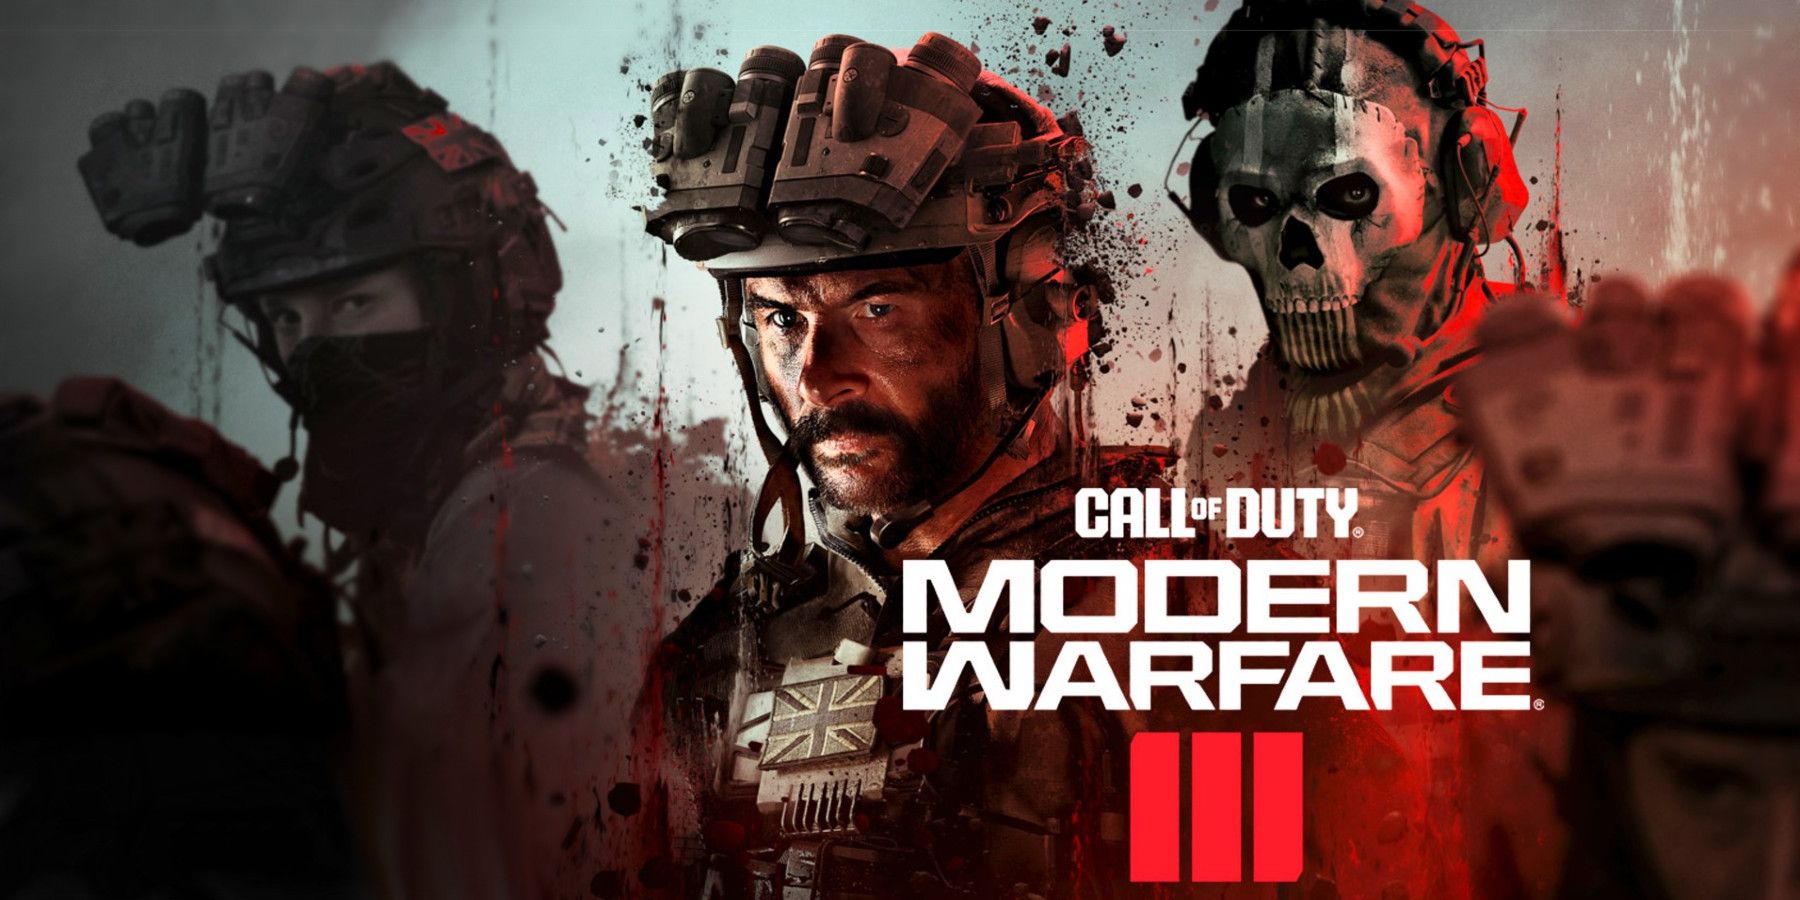 Call of Duty: Modern Warfare 3 - How to Access the Open Beta